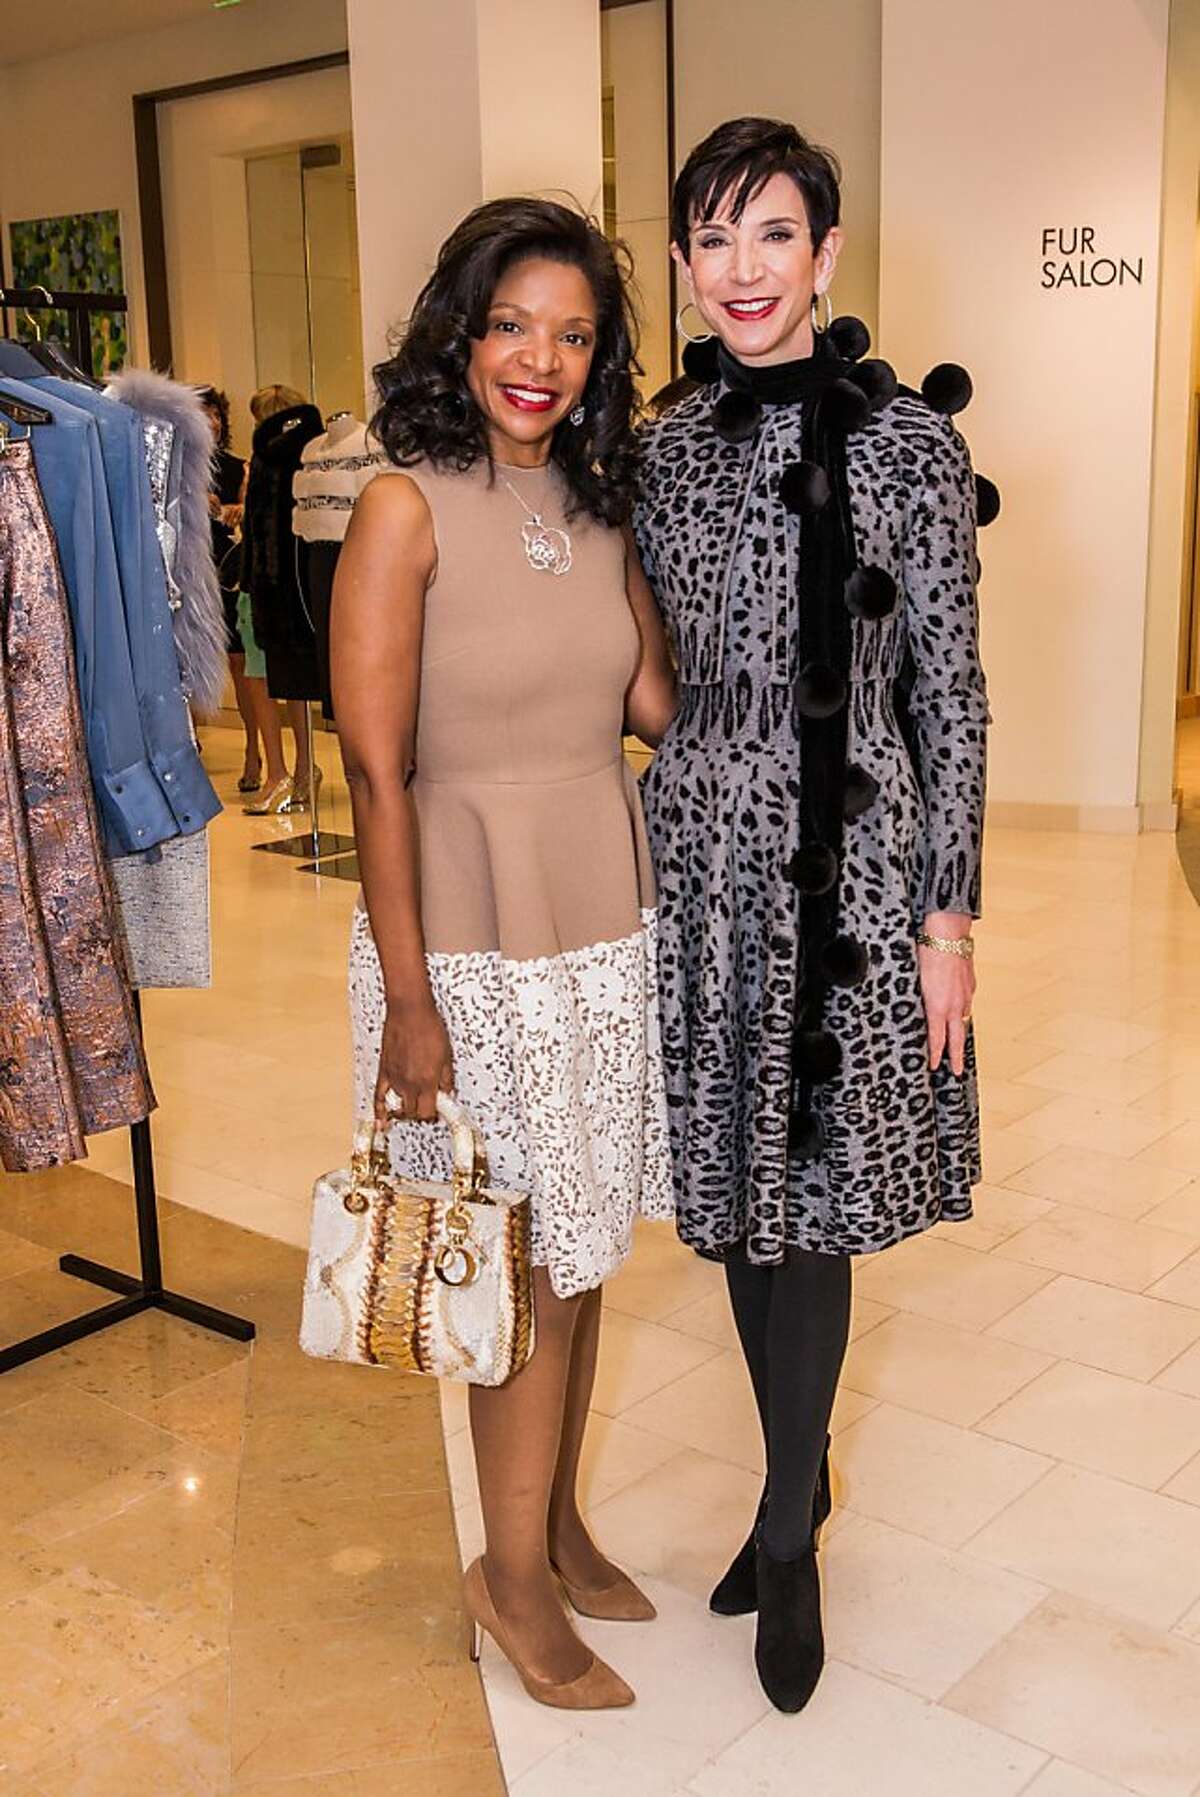 Vanity Fair introduced new rules for its International Best-Dressed List balloting, and contributor Amy Fine Collins (in black and gray Azzedine Alaia dress) came to a lunch at Neiman Marcus March 7, 2013, to let San Francisco's stylish set in on the details. Collins is seen here with arts patron Pamela Joyner in a beige Dolce and Gabbana dress.